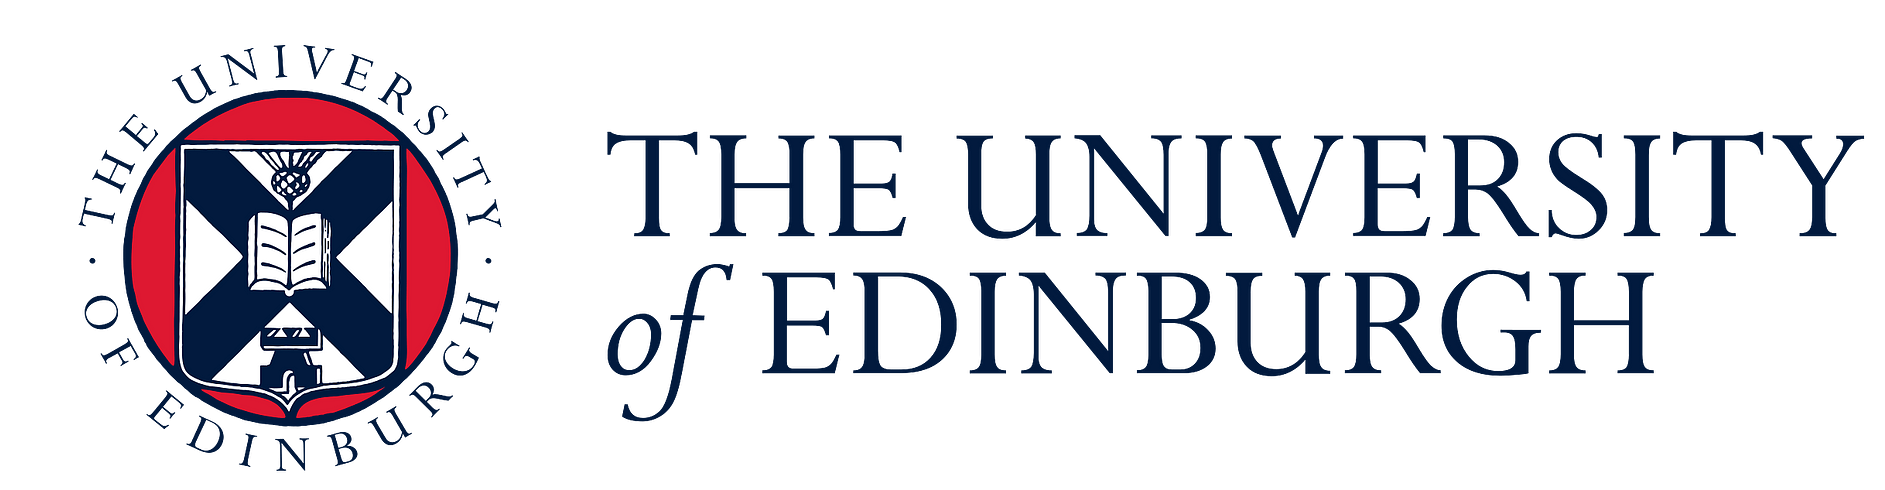 uoe-logo-wide.png